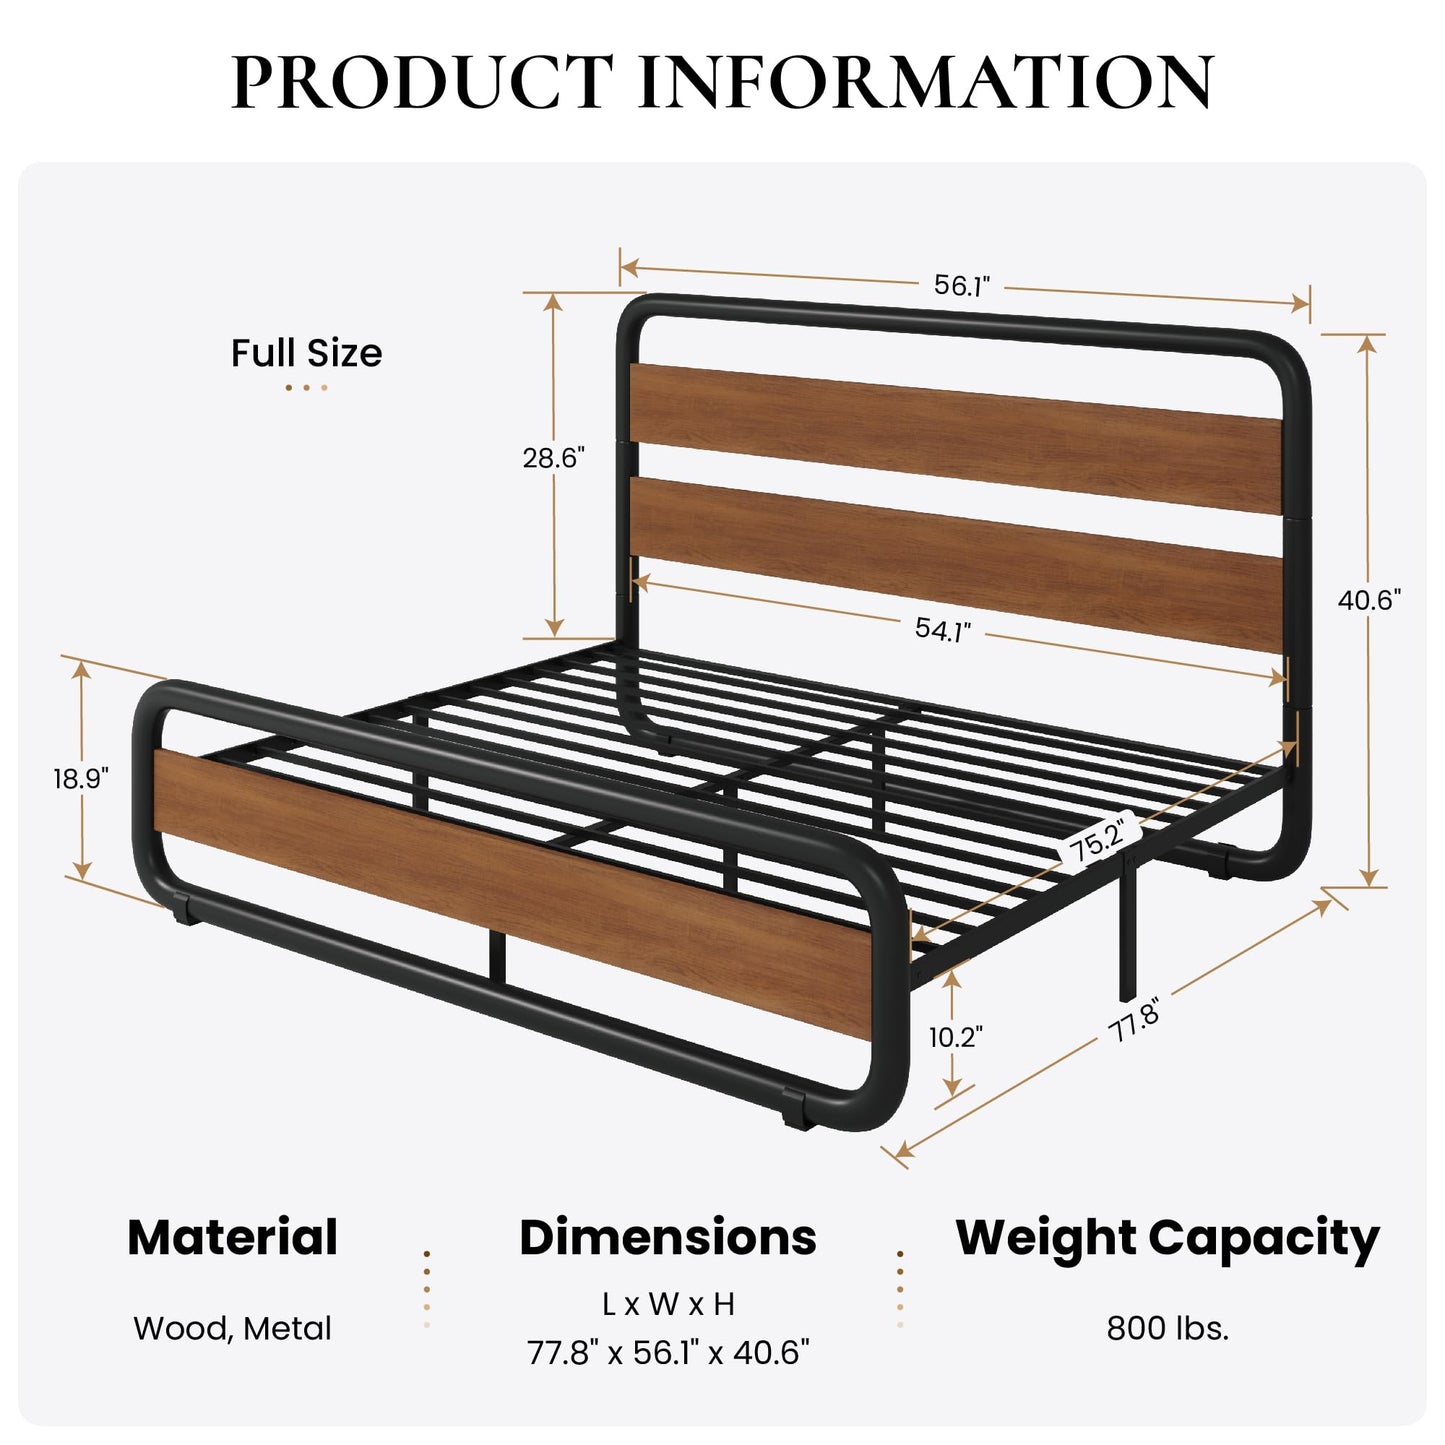 SHA CERLIN Full Size Metal Bed Frame with Wooden Headboard and Footboard, Heavy Duty Platform Frame with Under-Bed Storage, Noise Free, No Box Spring